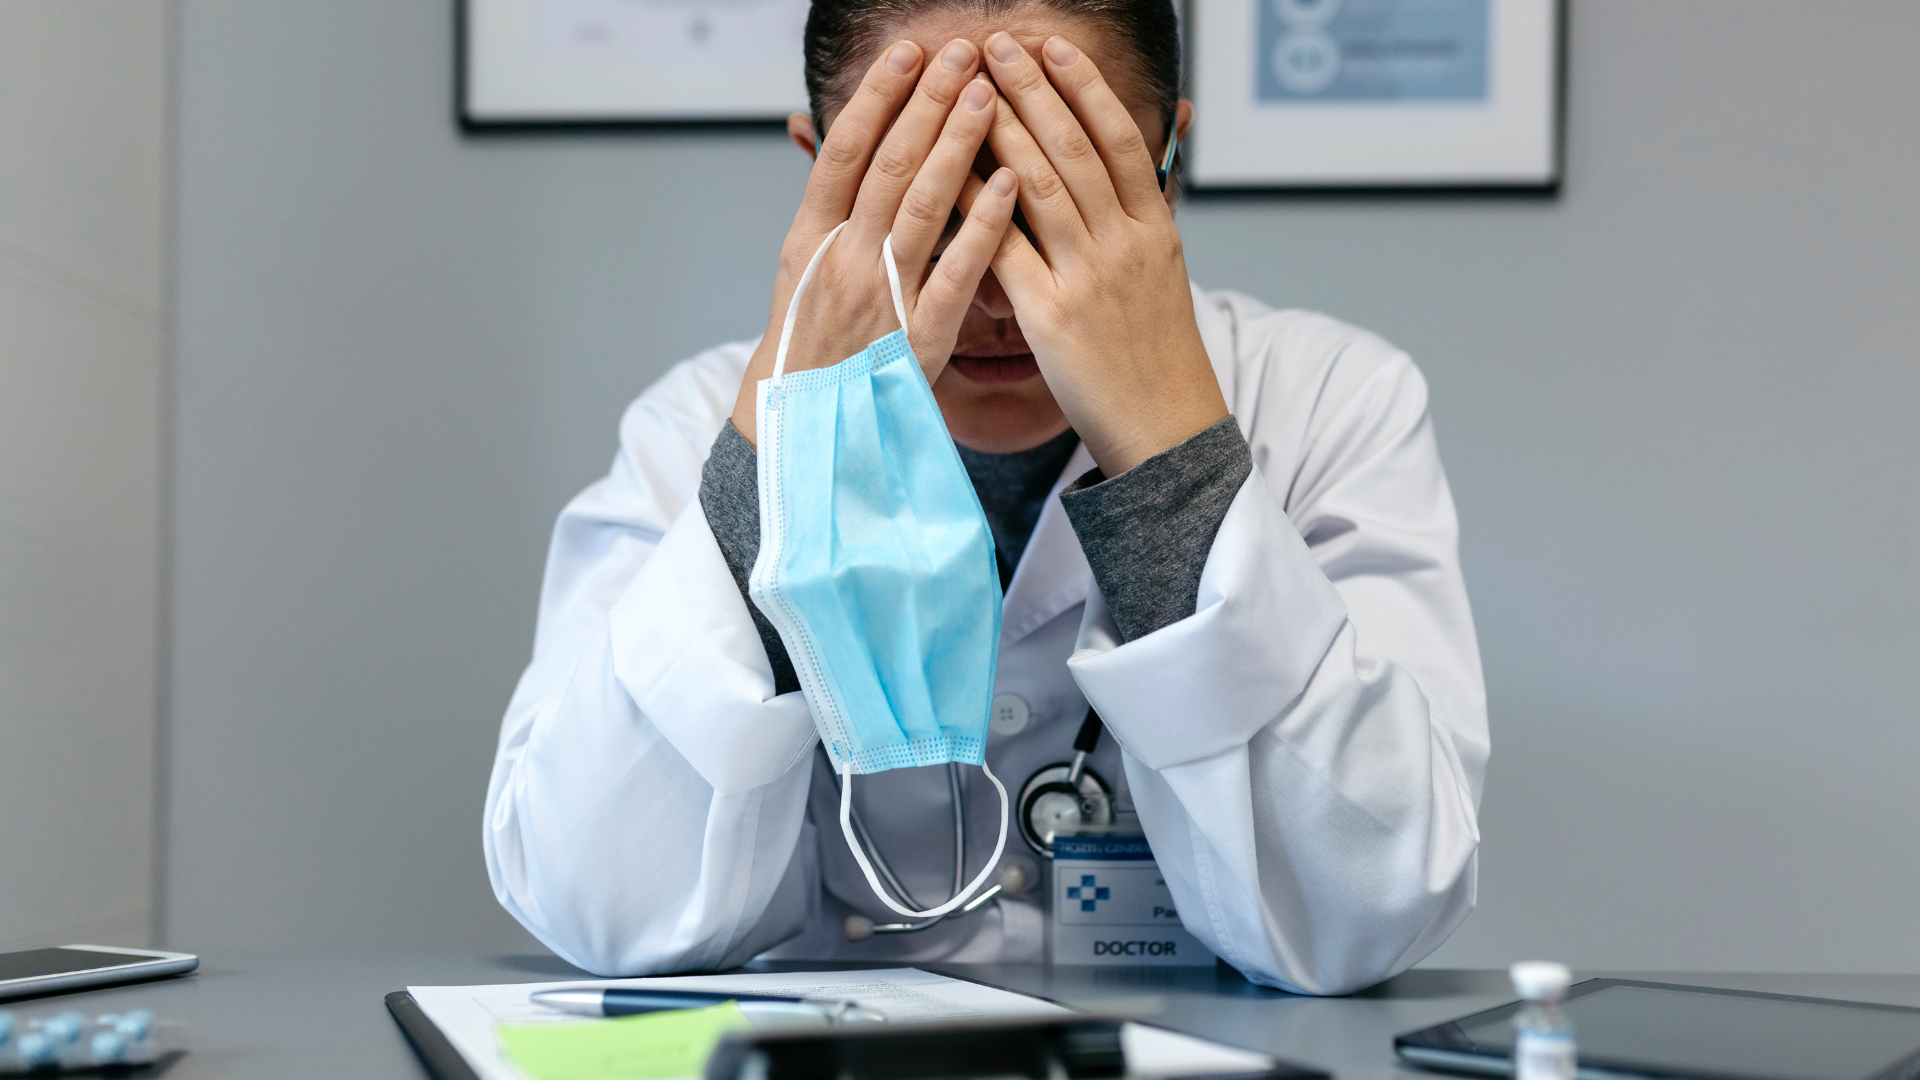 Doctor experiencing burnout sitting at desk showing stress with their hands on their face